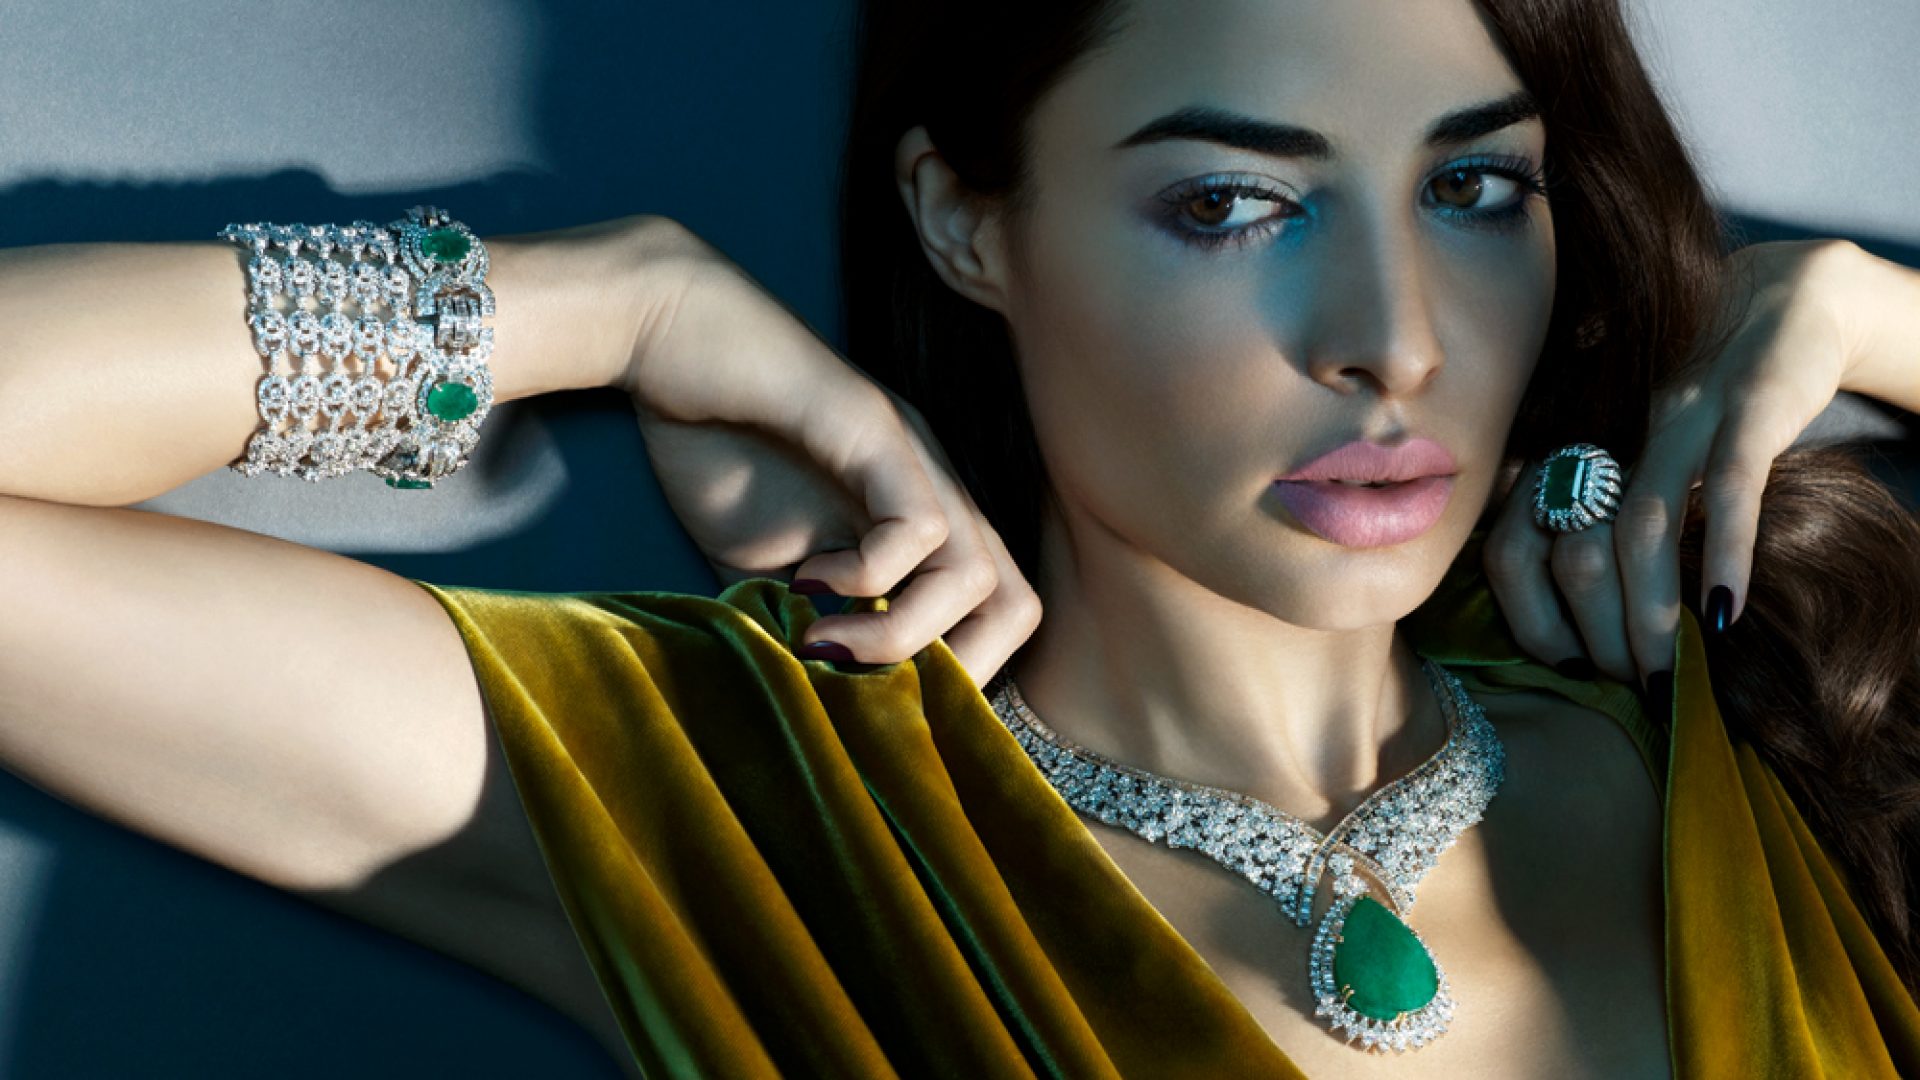 Few Factors To Know Before Buying A Luxury Jewelry Item